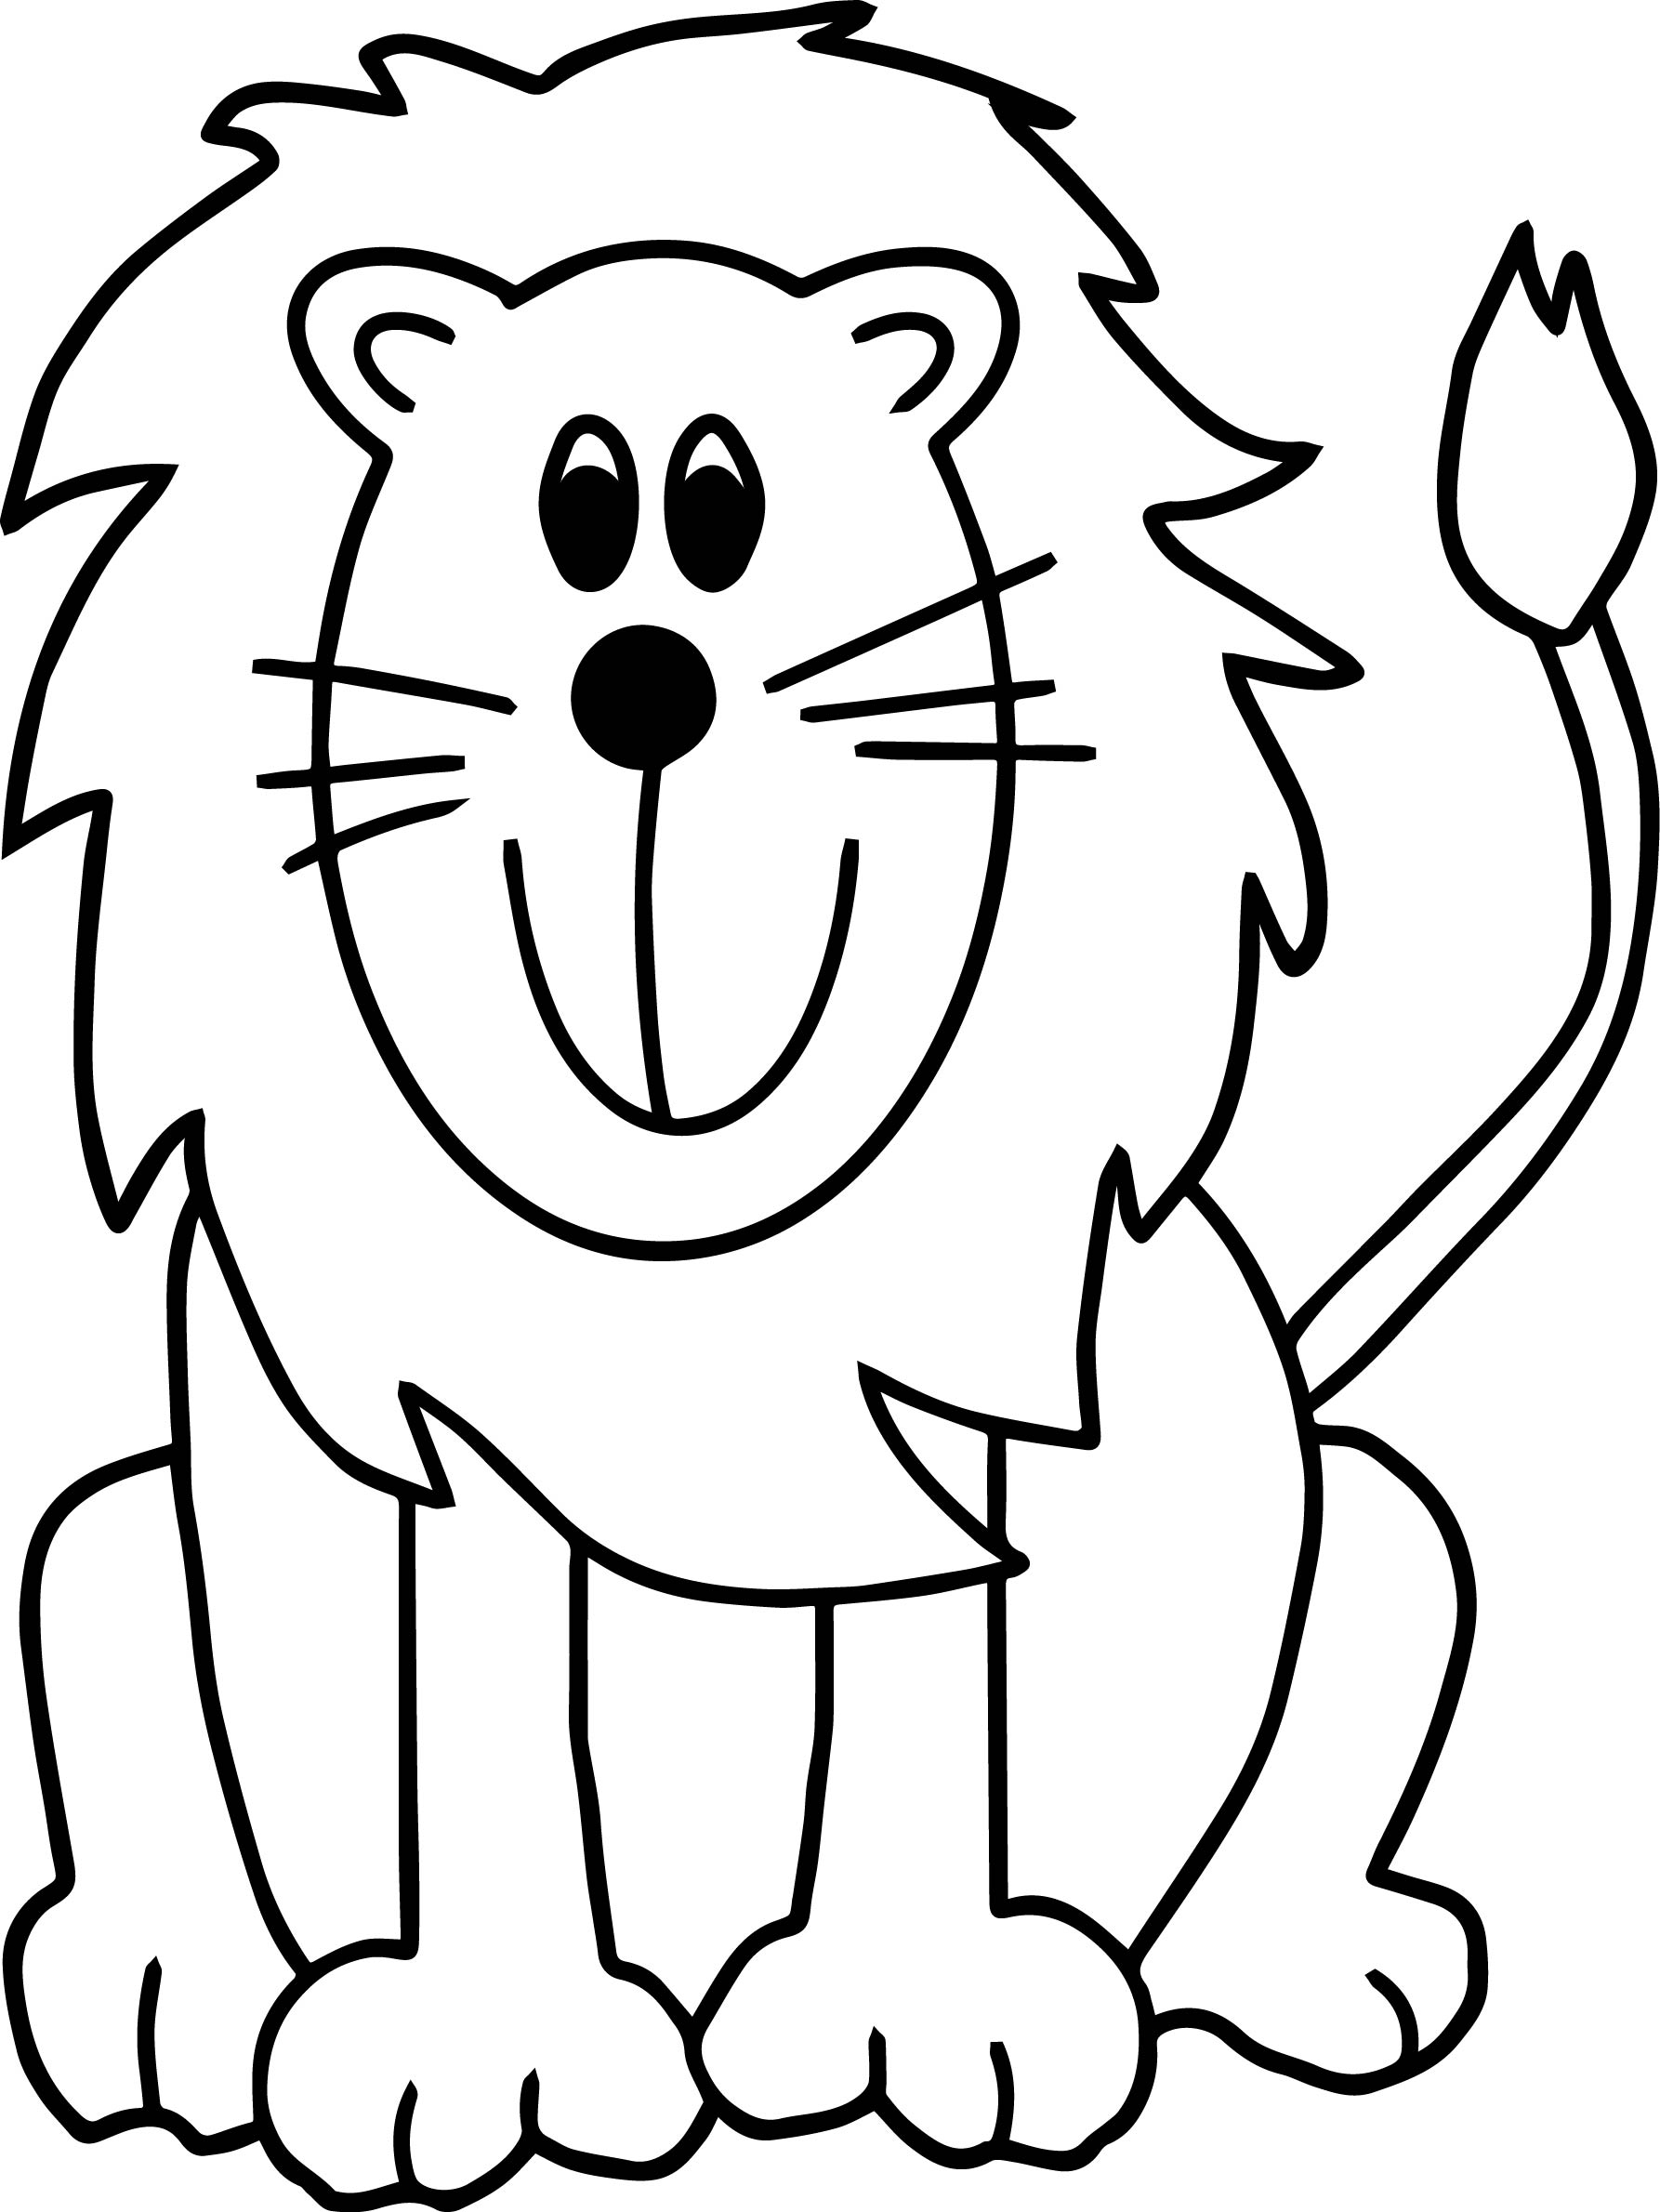 Zookeeper Coloring Page At GetColorings Free Printable Colorings Pages To Print And Color